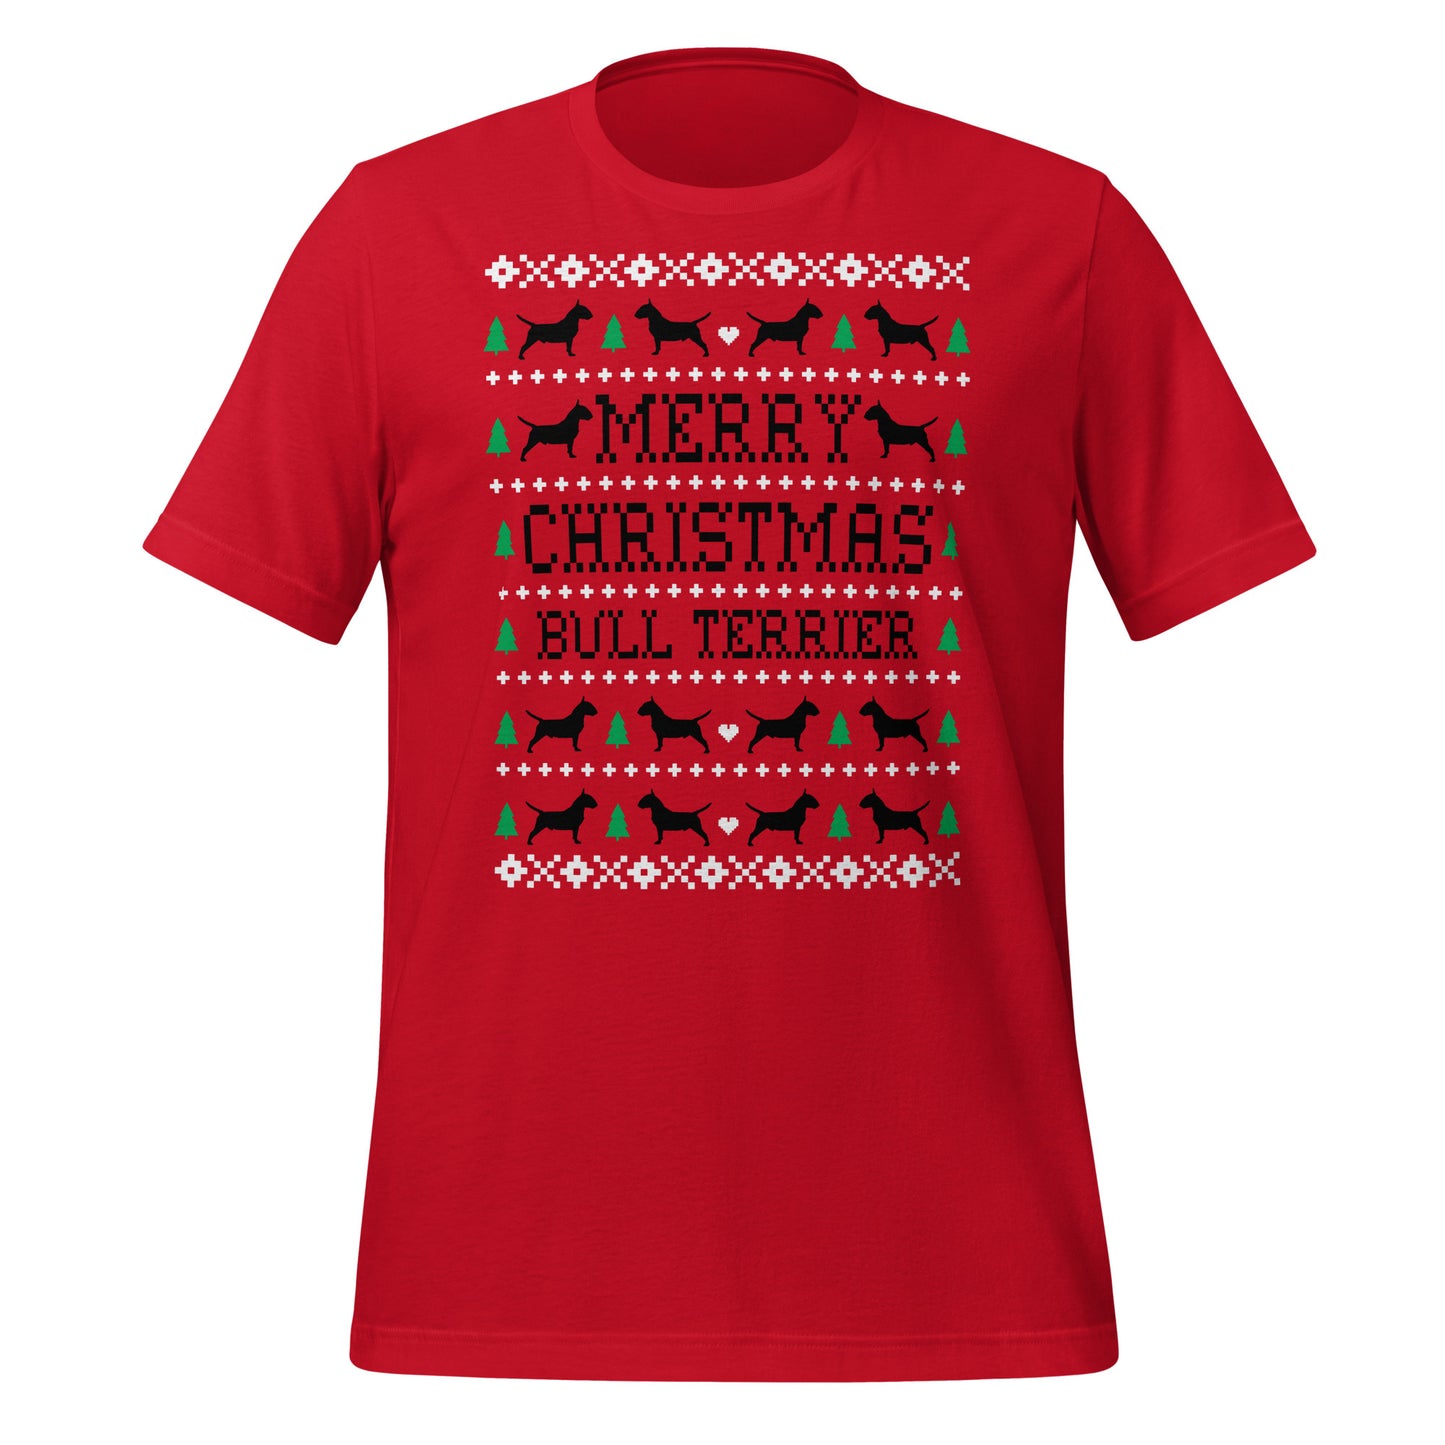 English Bull Terrier Ugly Christmas t-shirt red by Dog Artistry.